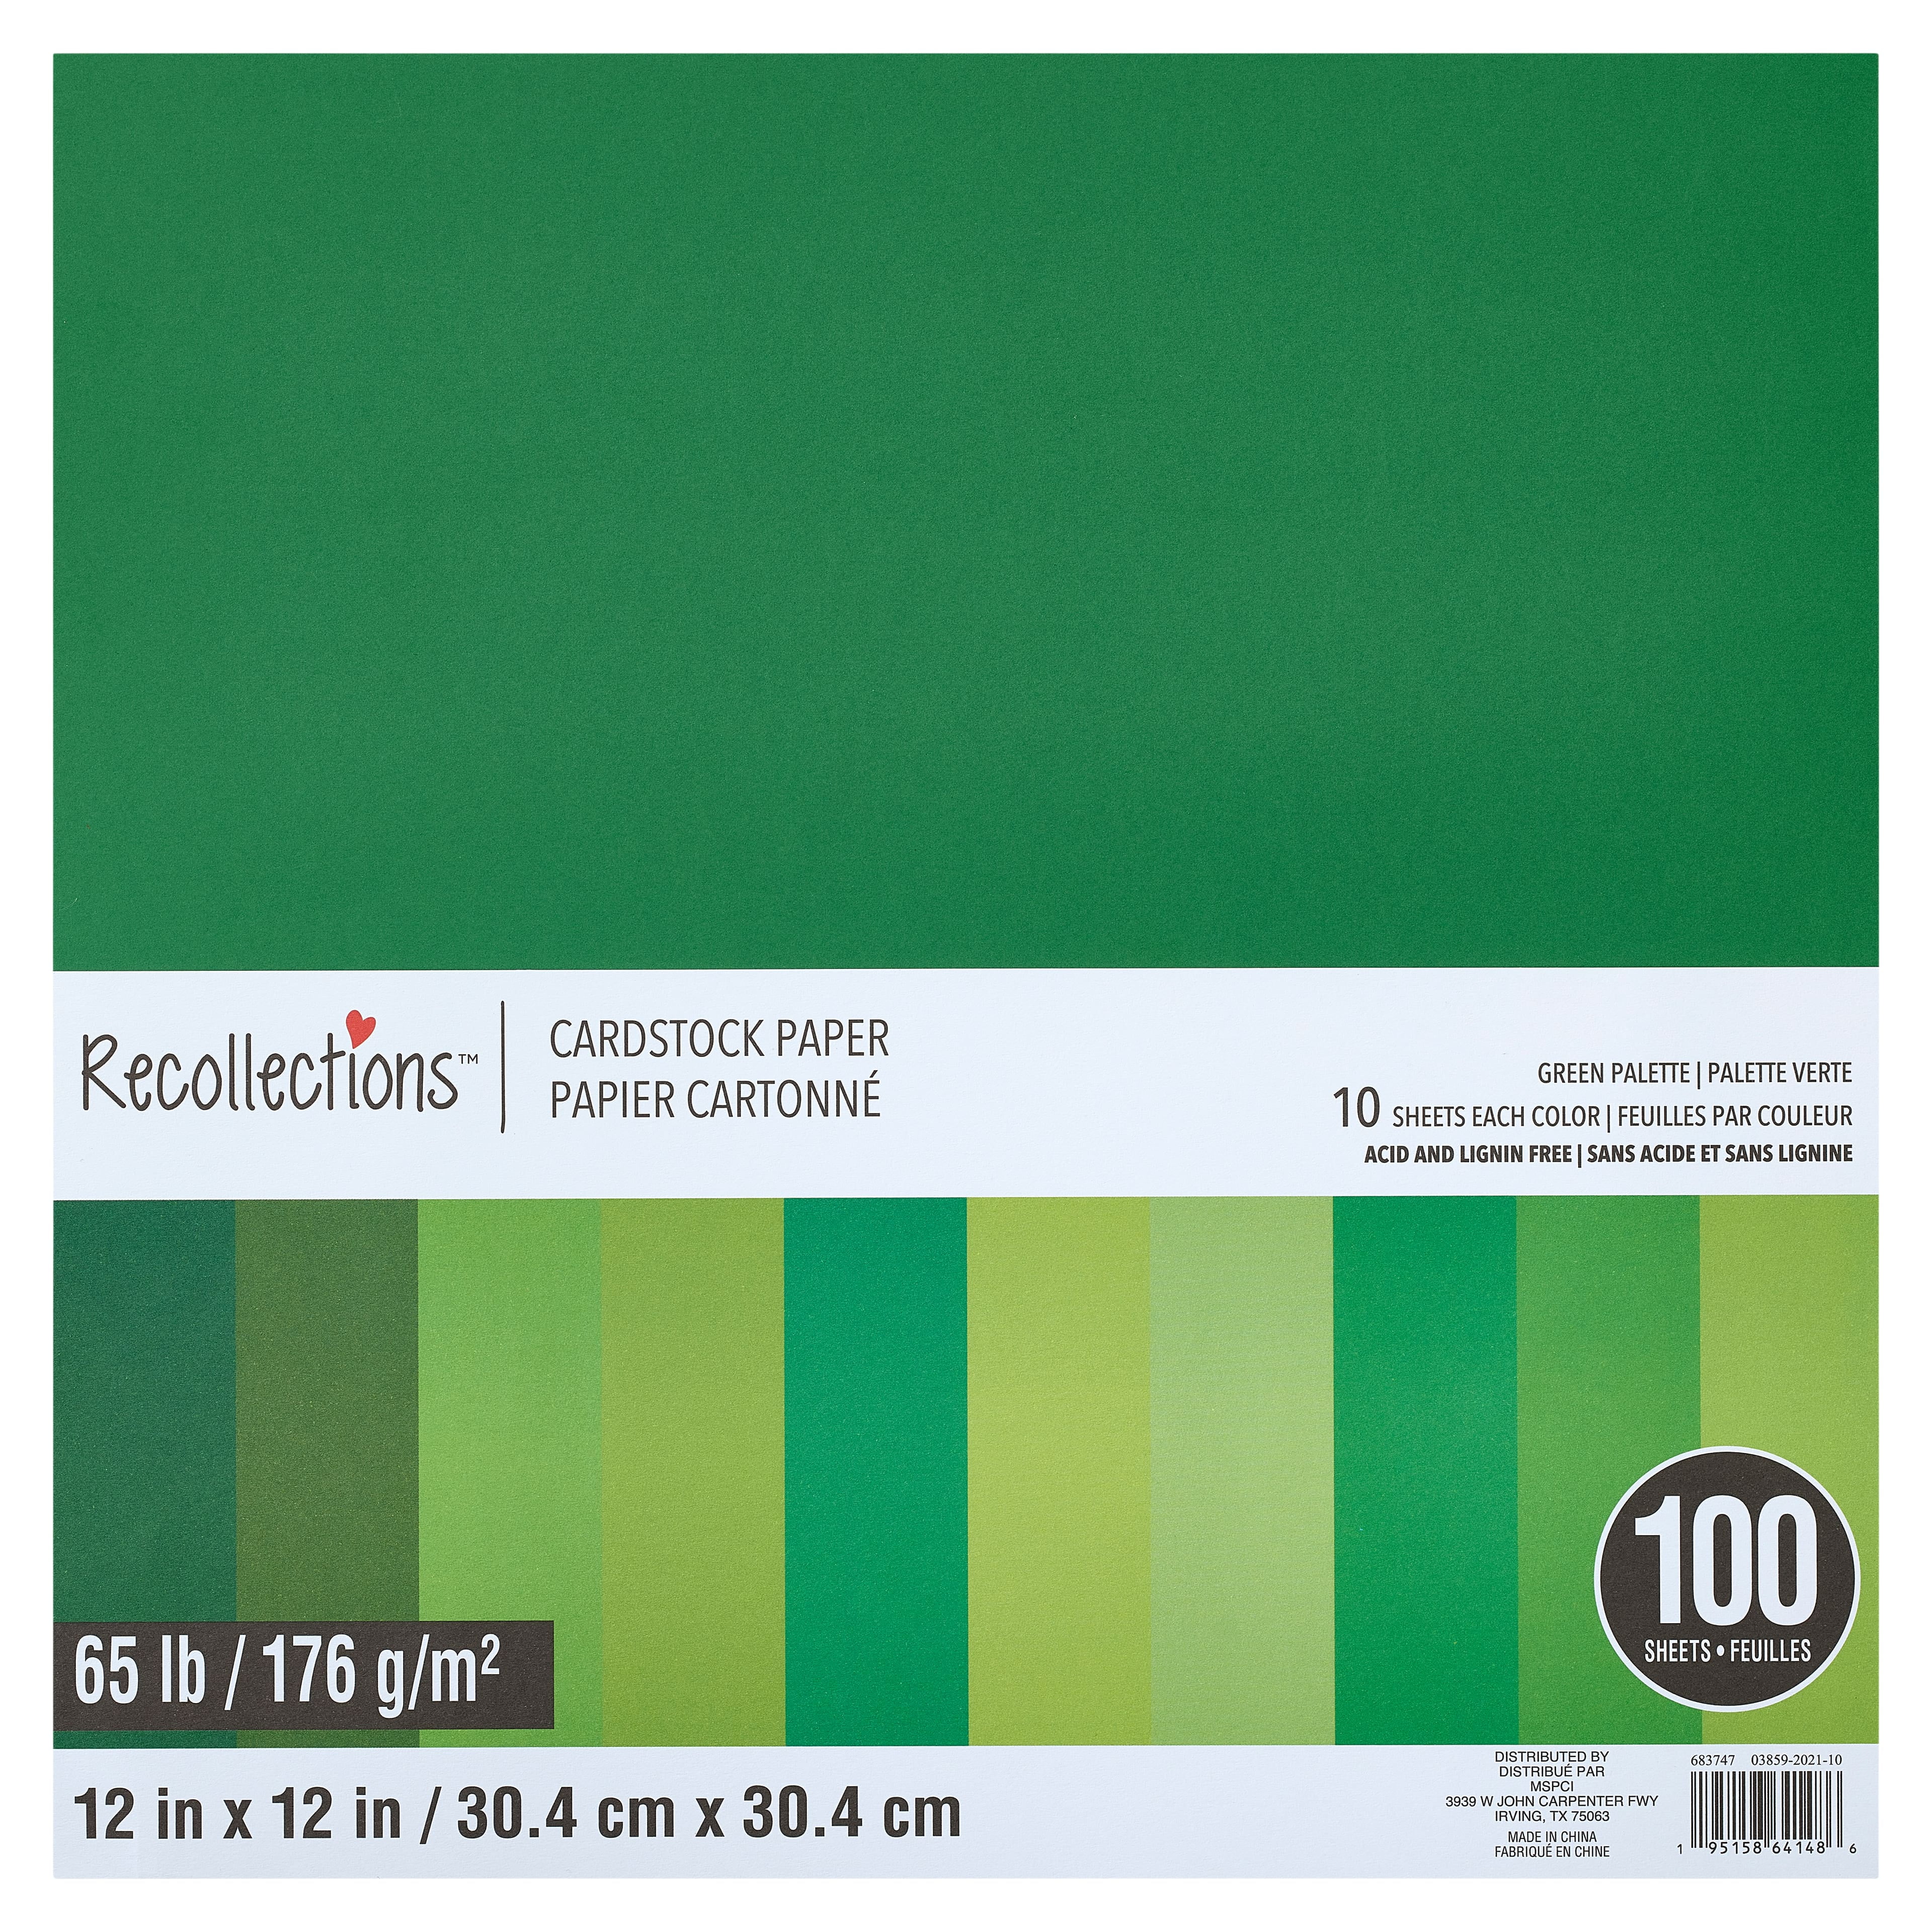 Green Palette 12 x 12 Cardstock Paper by Recollections™, 100 Sheets 